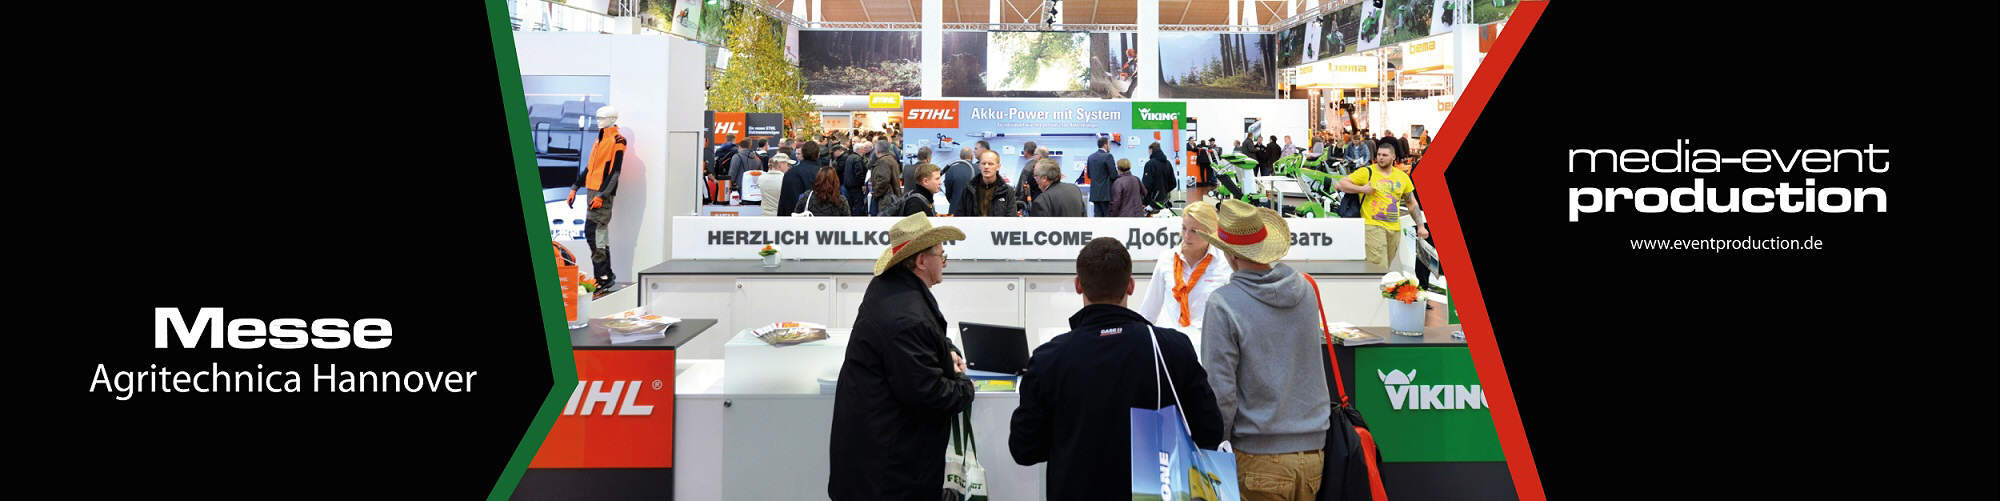 media-event-production Messe